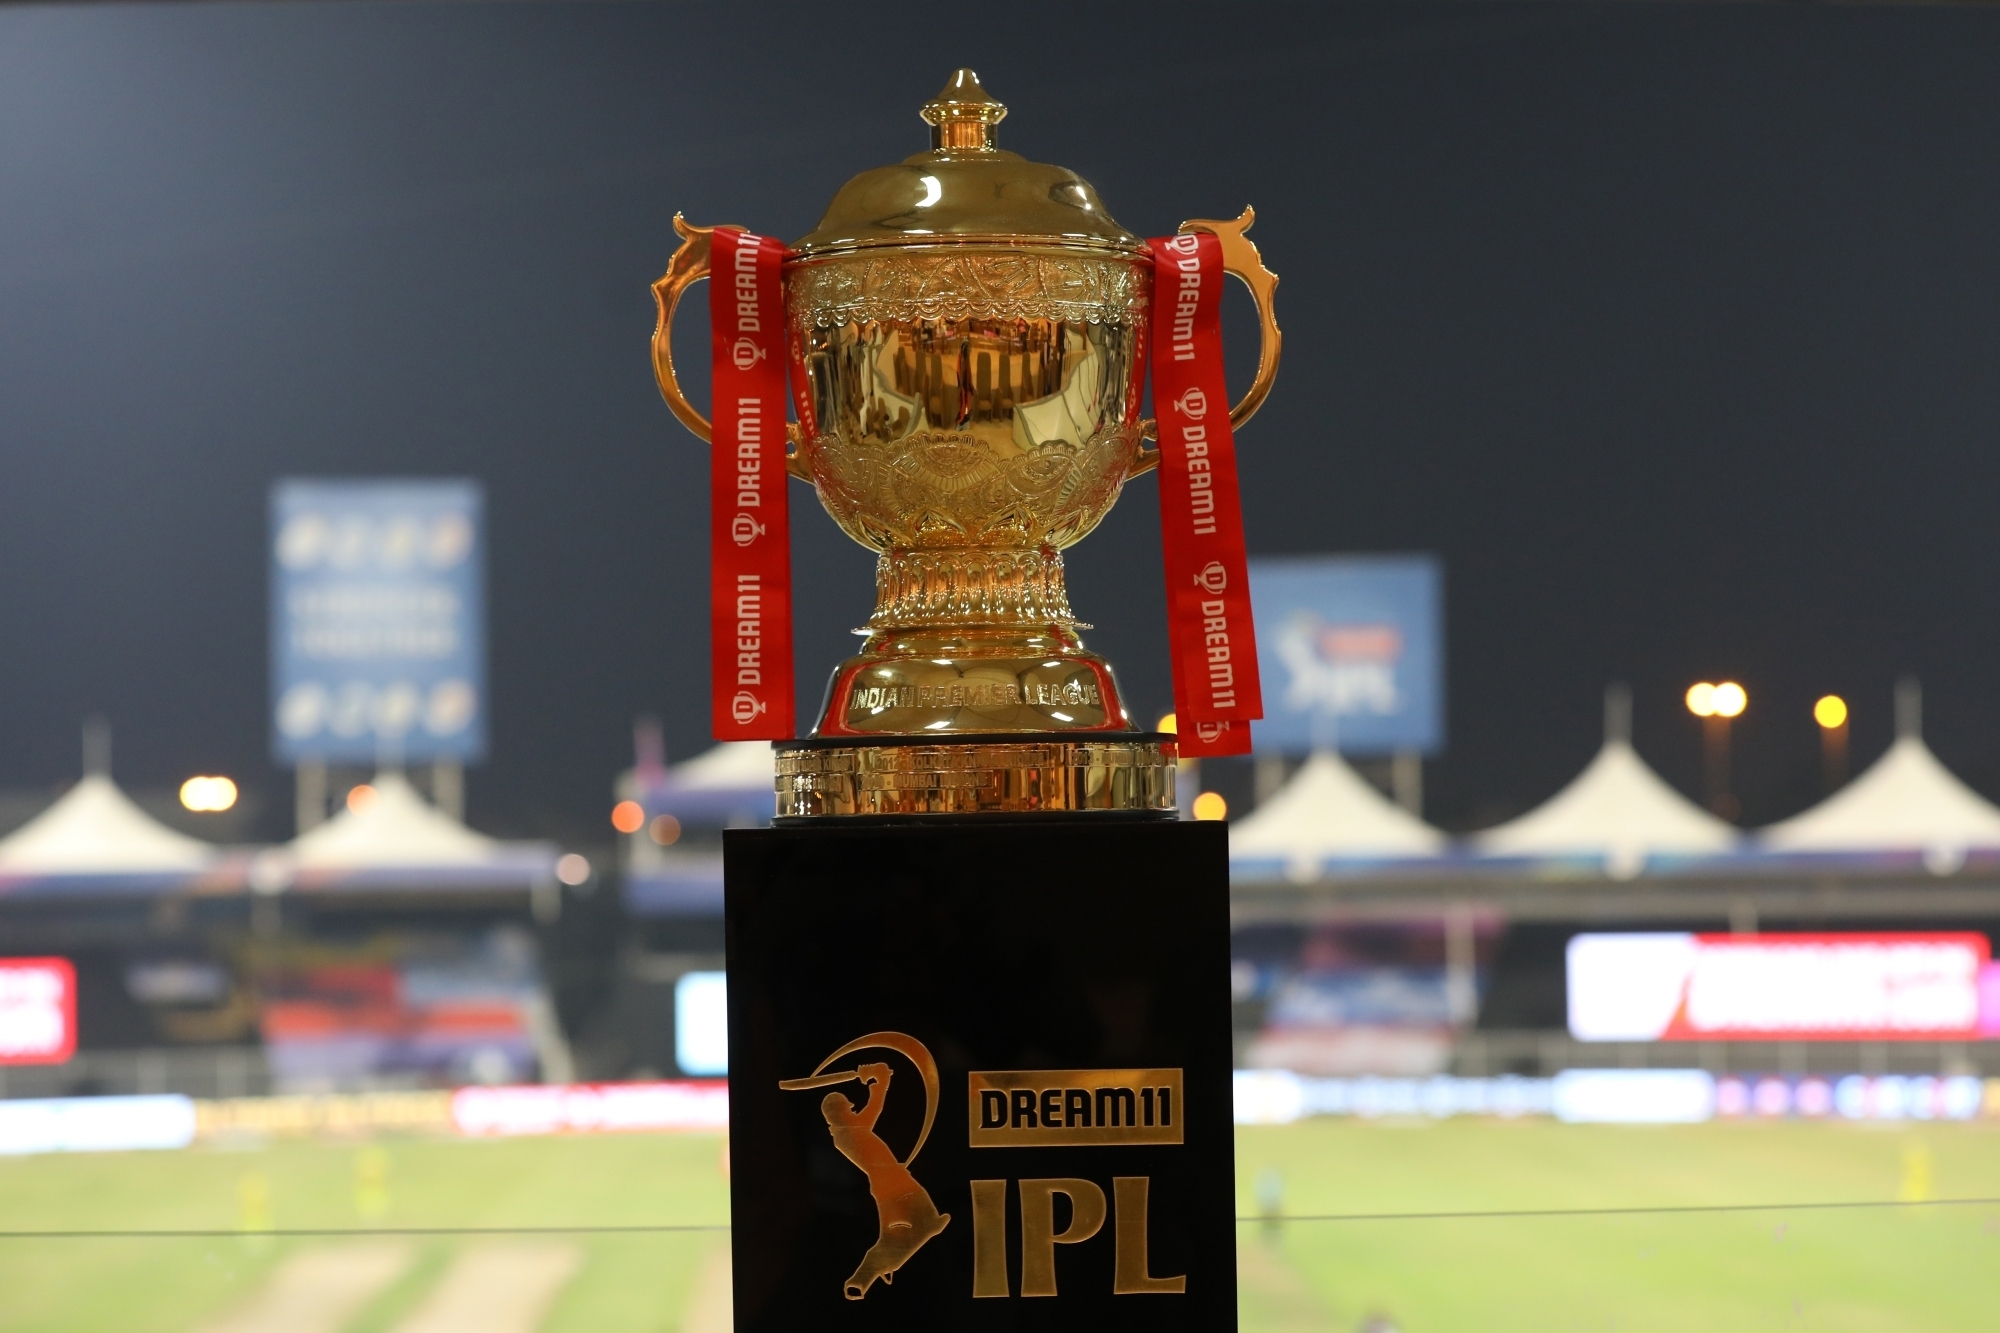 The IPL 2020 is nearing the end of its league stage and playoffs are just around the corner